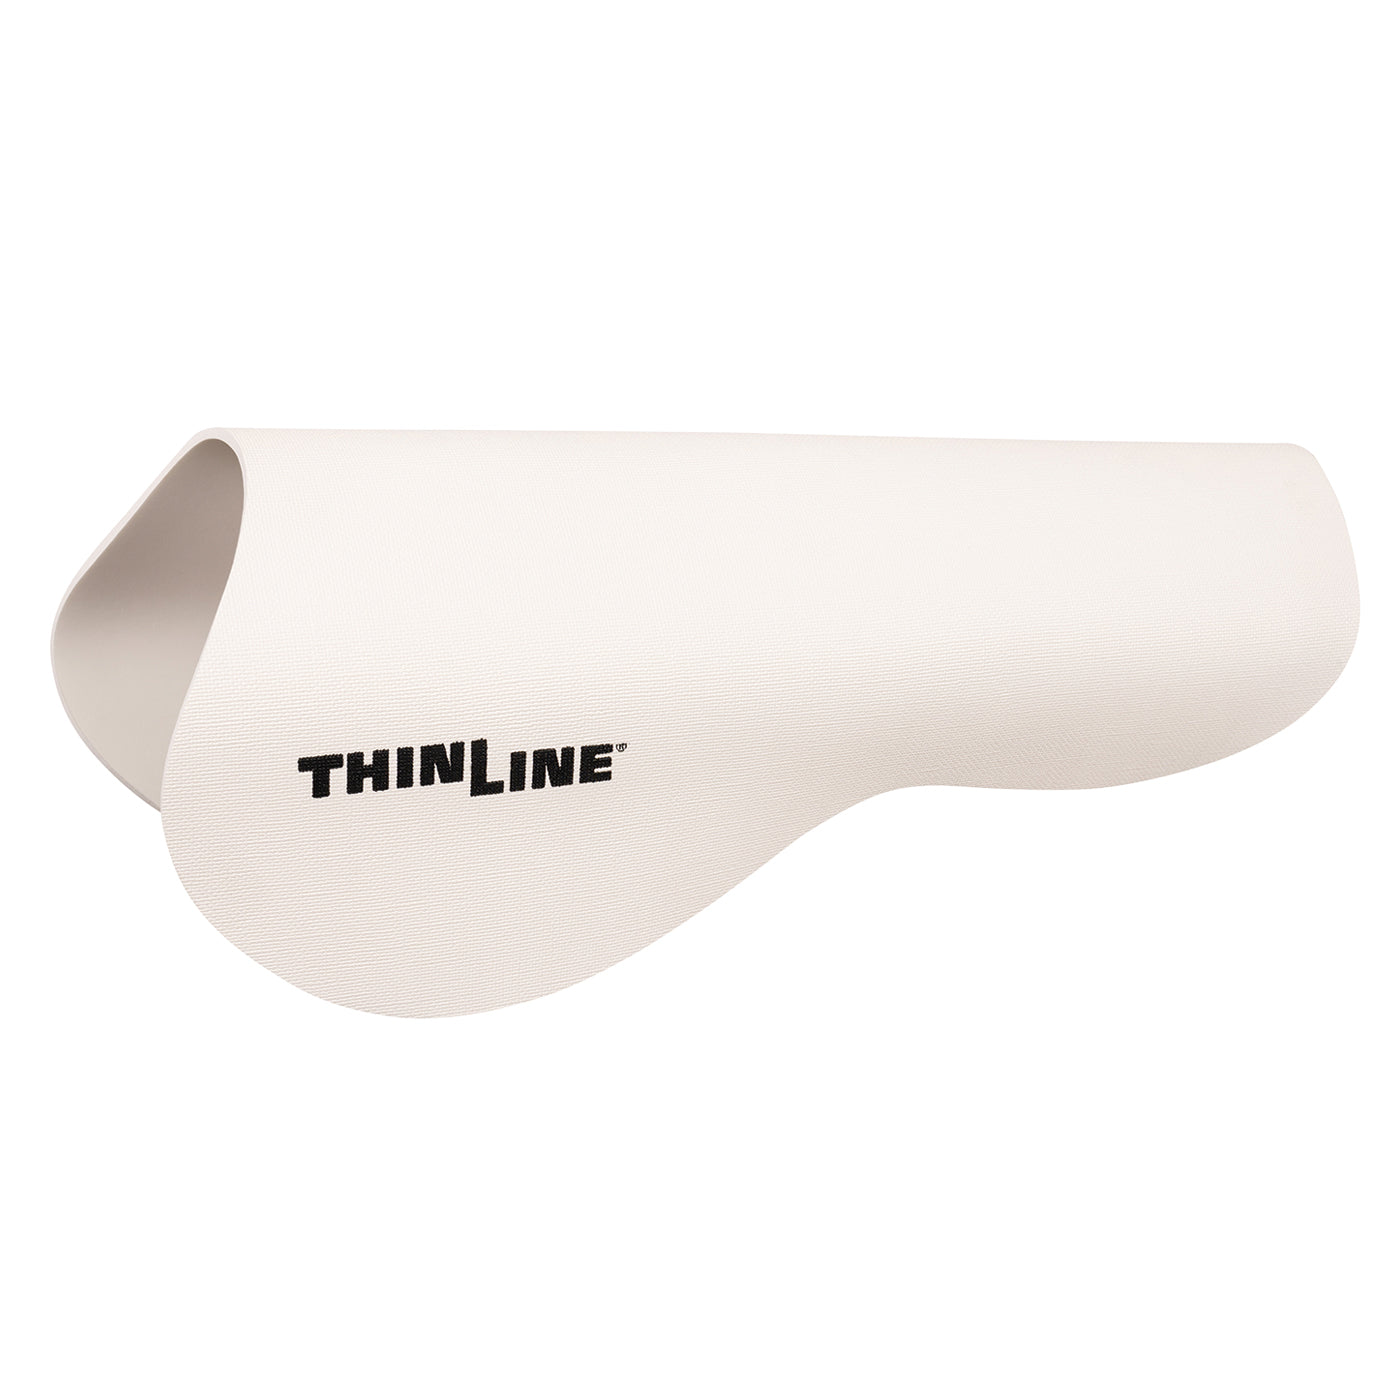 ThinLine Trifecta Cotton Half Pad with Sheepskin - The Carousel Horse